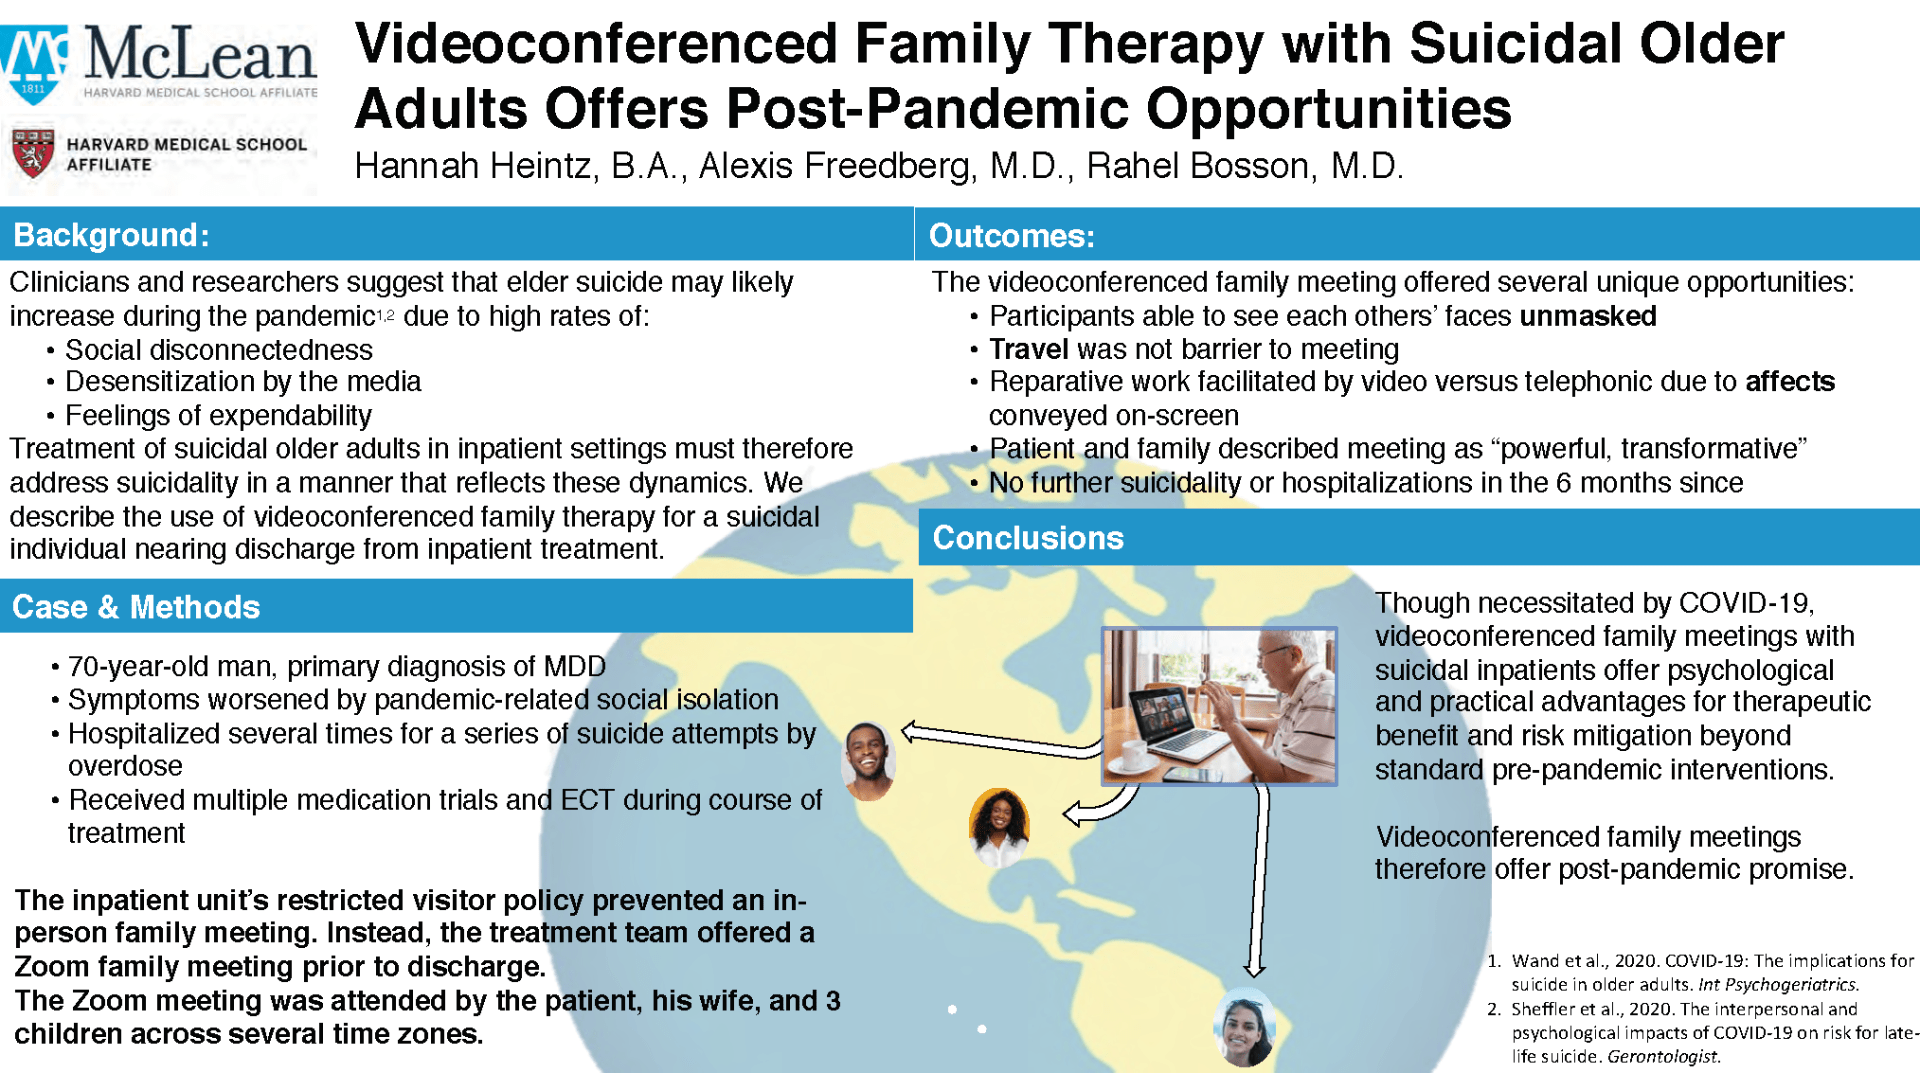 Videoconferencing for Family Therapy with Suicidal Older Adults Offers Post-Pandemic Opportunities